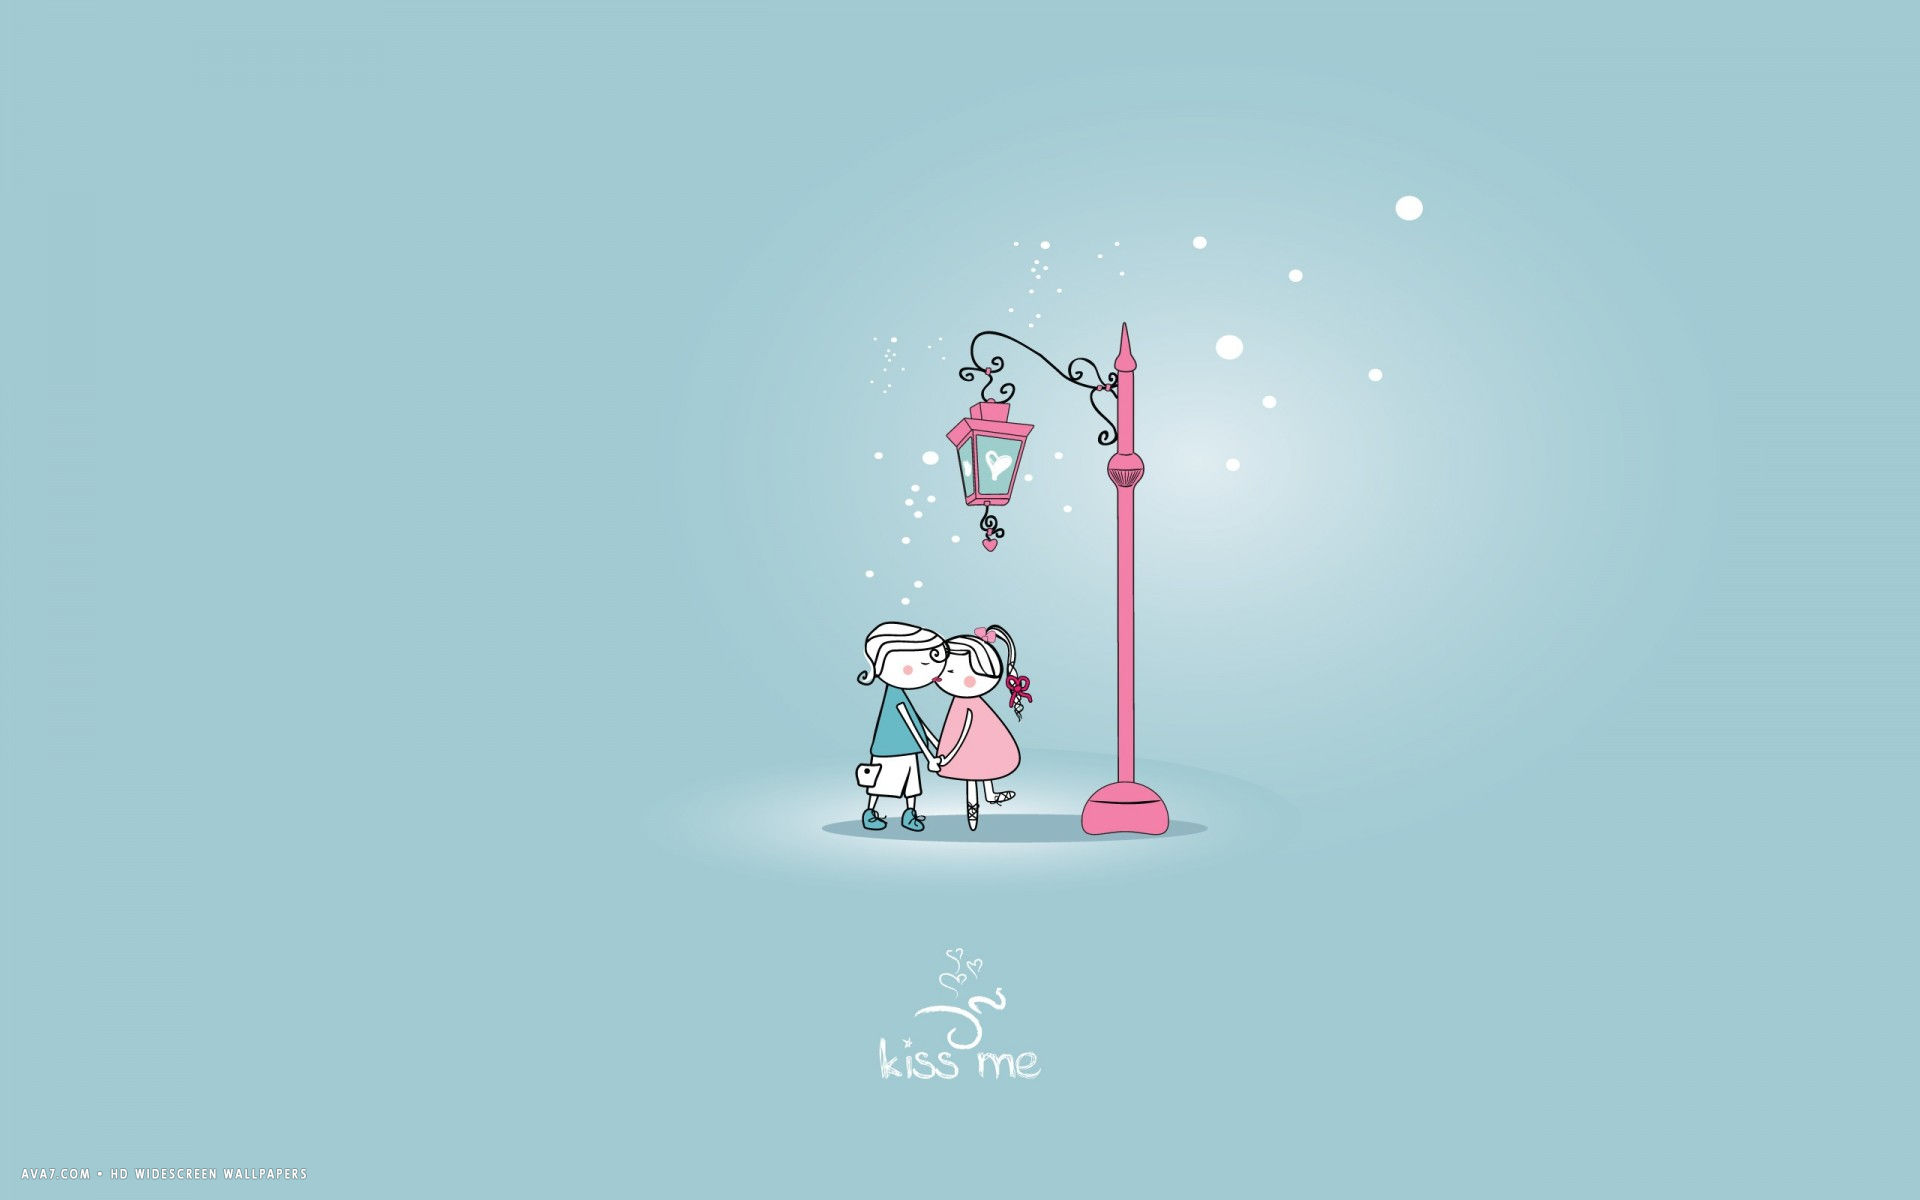 Romantic Kiss Me Anime Love Couple Street Lamp Hd Widescreen - Animated Wallpaper Valentines Day - HD Wallpaper 